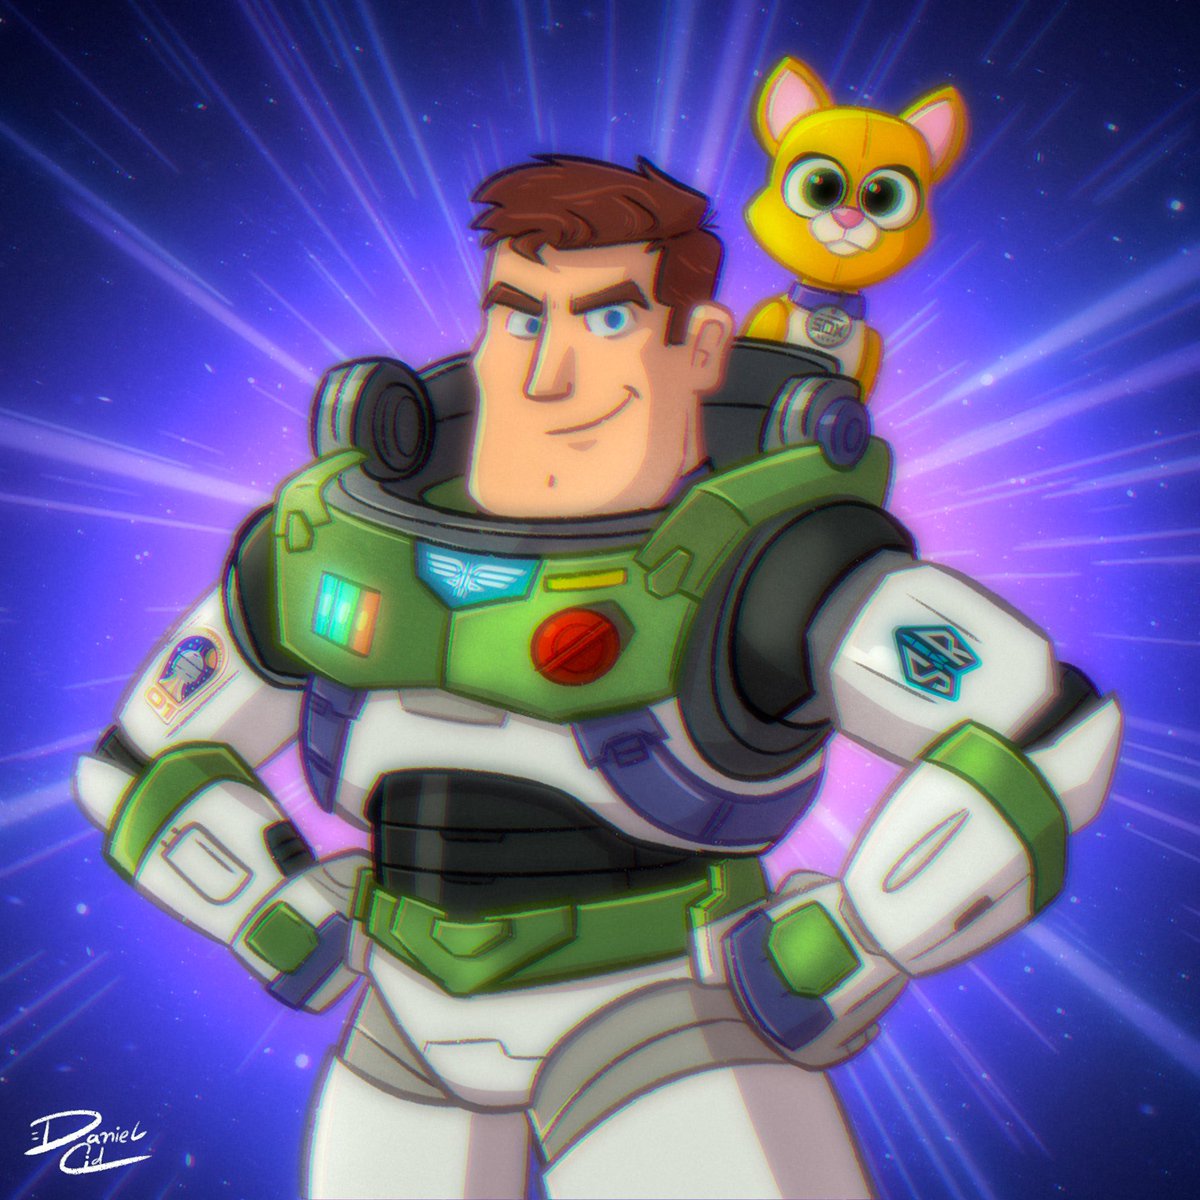 1 year ago today, #Lightyear released in theaters.
Thank you @AngusMacLane and all artists in Pixar for this epic movie.
#ToInfinityAndBeyond